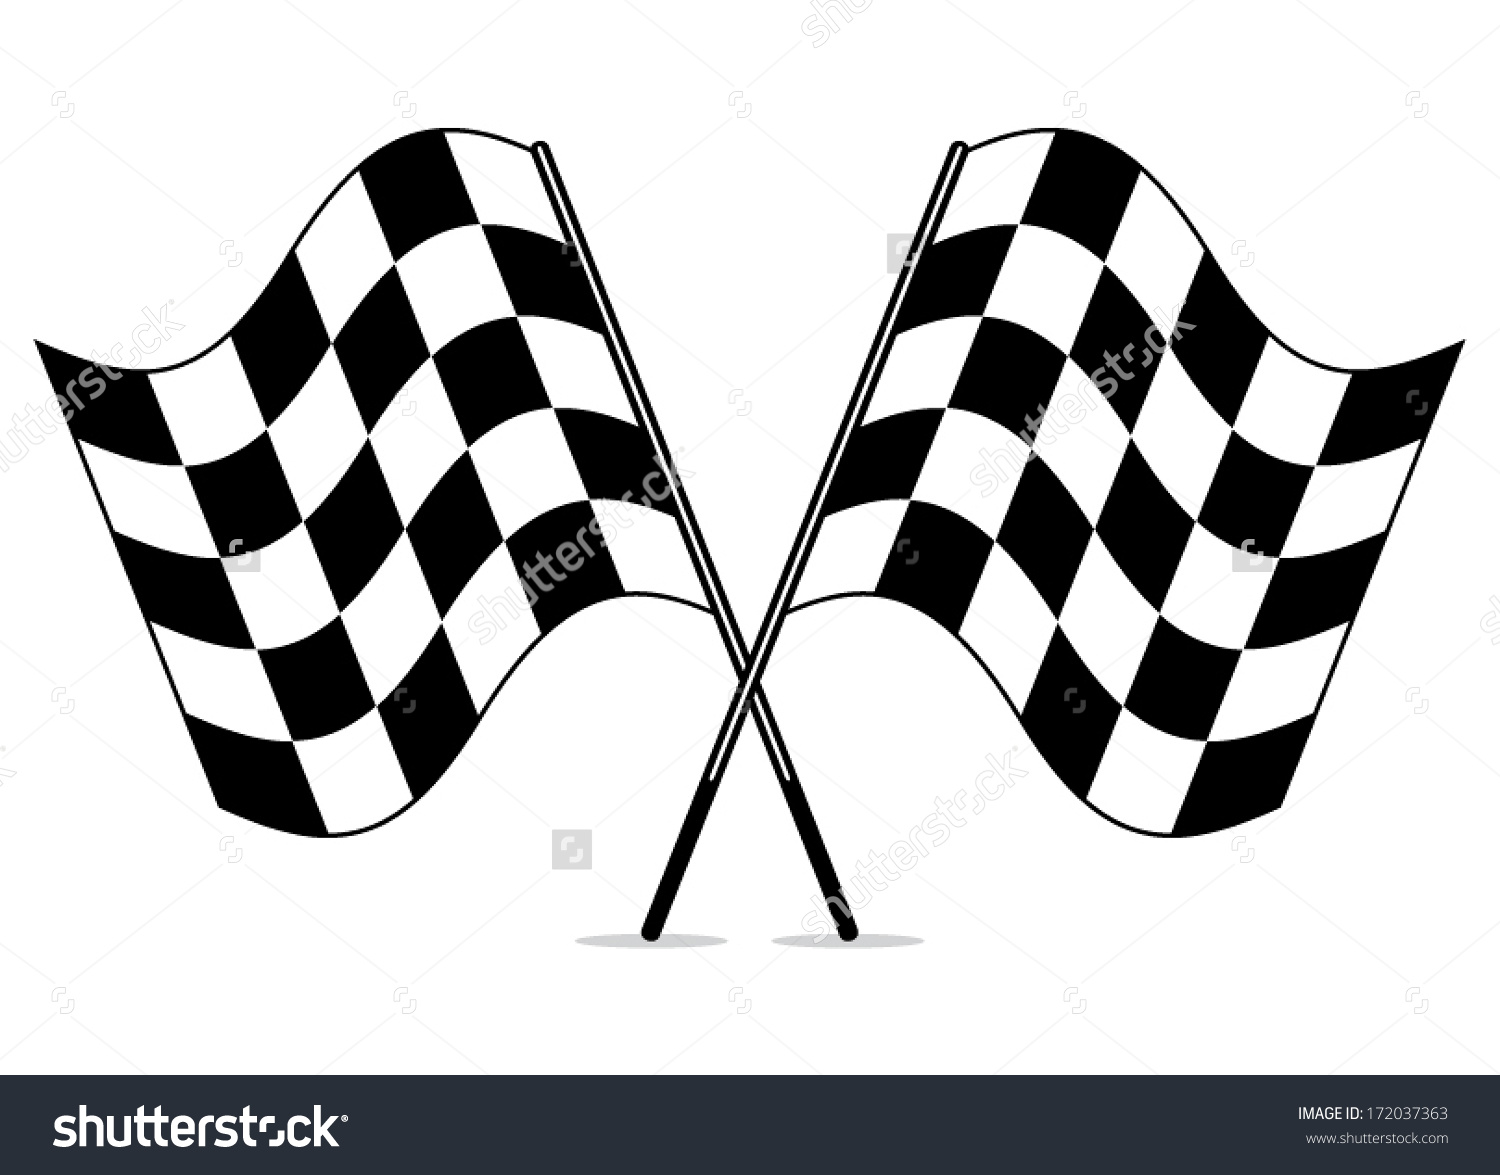 vector black and white crossed racing checkered flags clipart